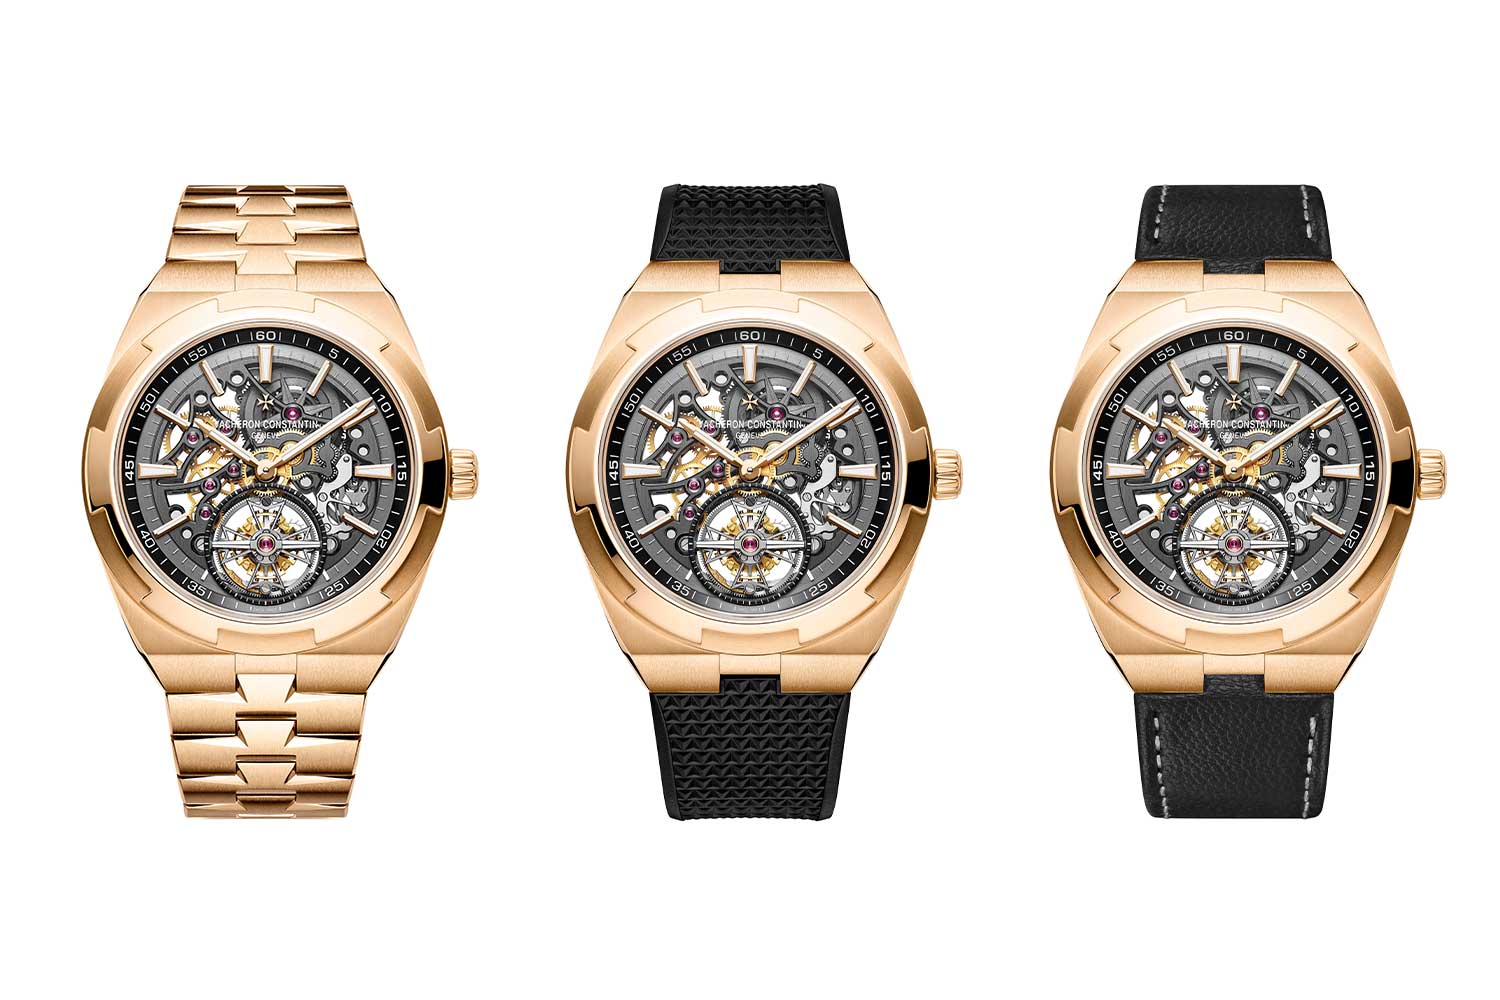 Vacheron Constantin Overseas Tourbillon Skeleton in 18K 5N pink gold comes with two additional interchangeable straps